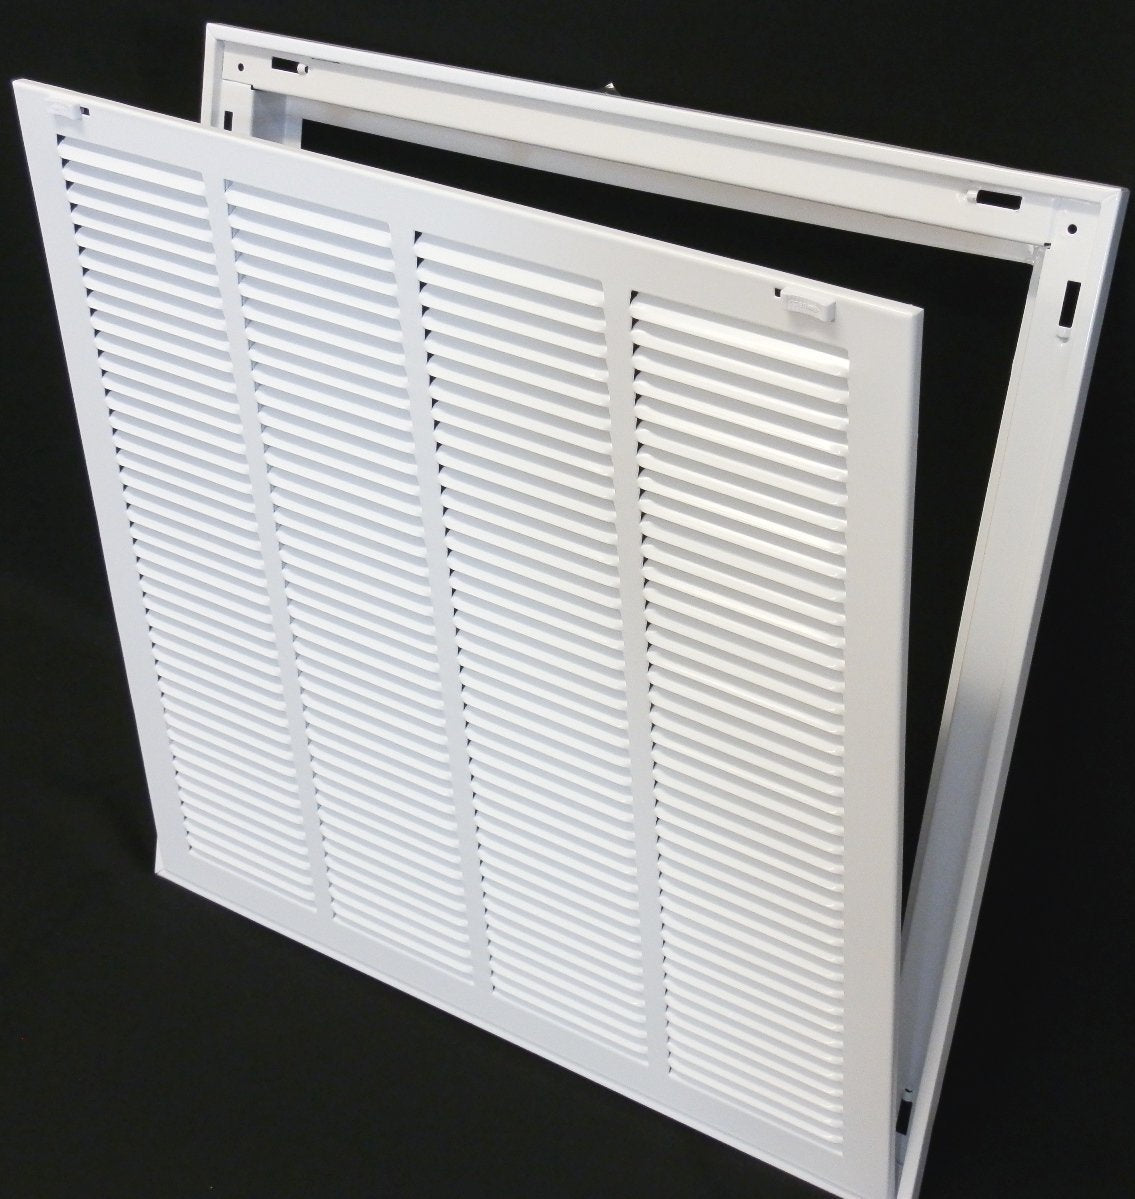 18&quot; X 6&quot; Steel Return Air Filter Grille for 1&quot; Filter - Removable Frame - [Outer Dimensions: 20 5/8&quot; X 8 5/8&quot;]